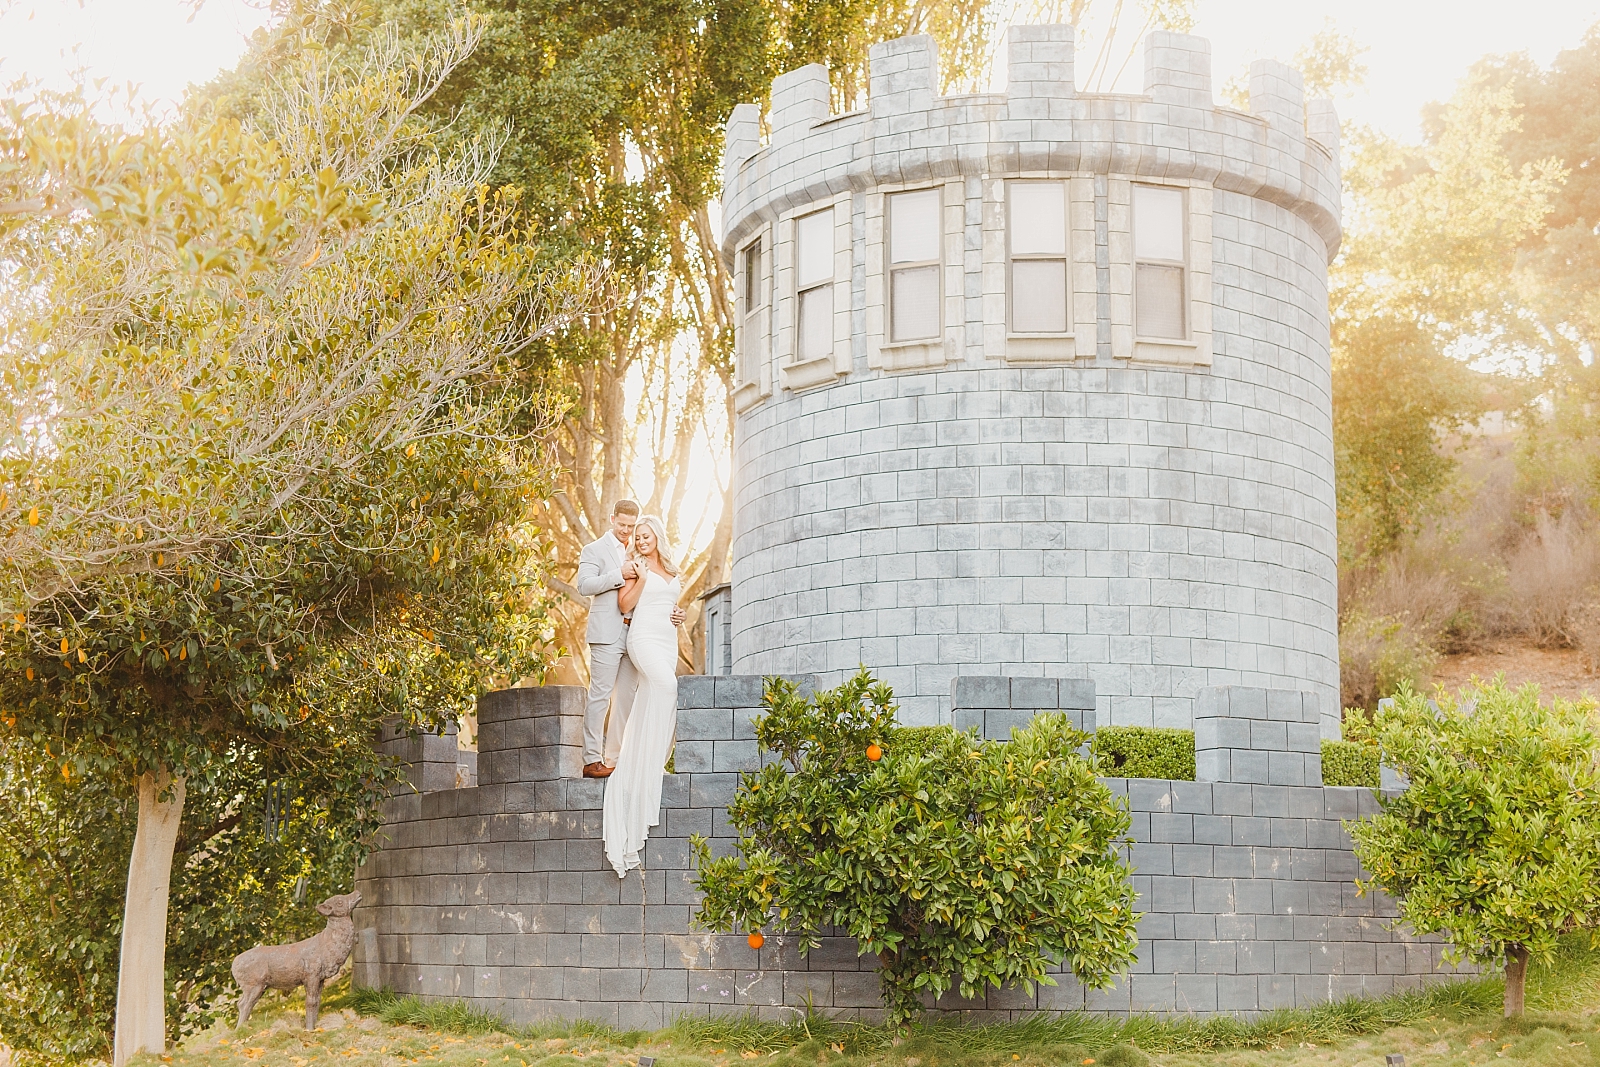 Engagement photos at a castle in Southern California